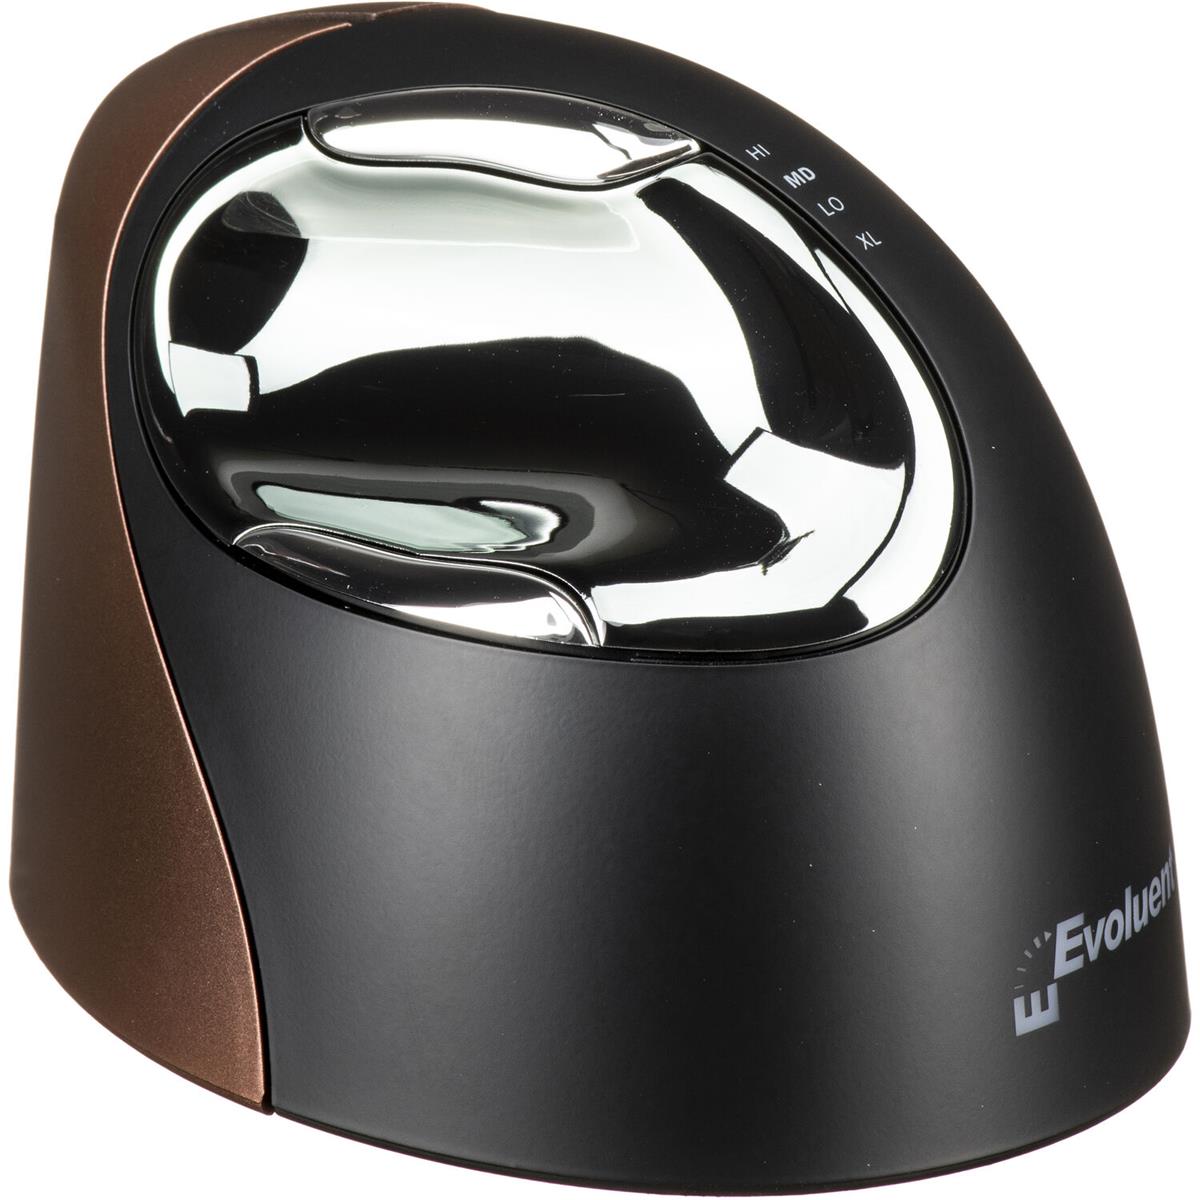 Image of Evoluent VerticalMouse 4 Ergonomic Wireless Mouse